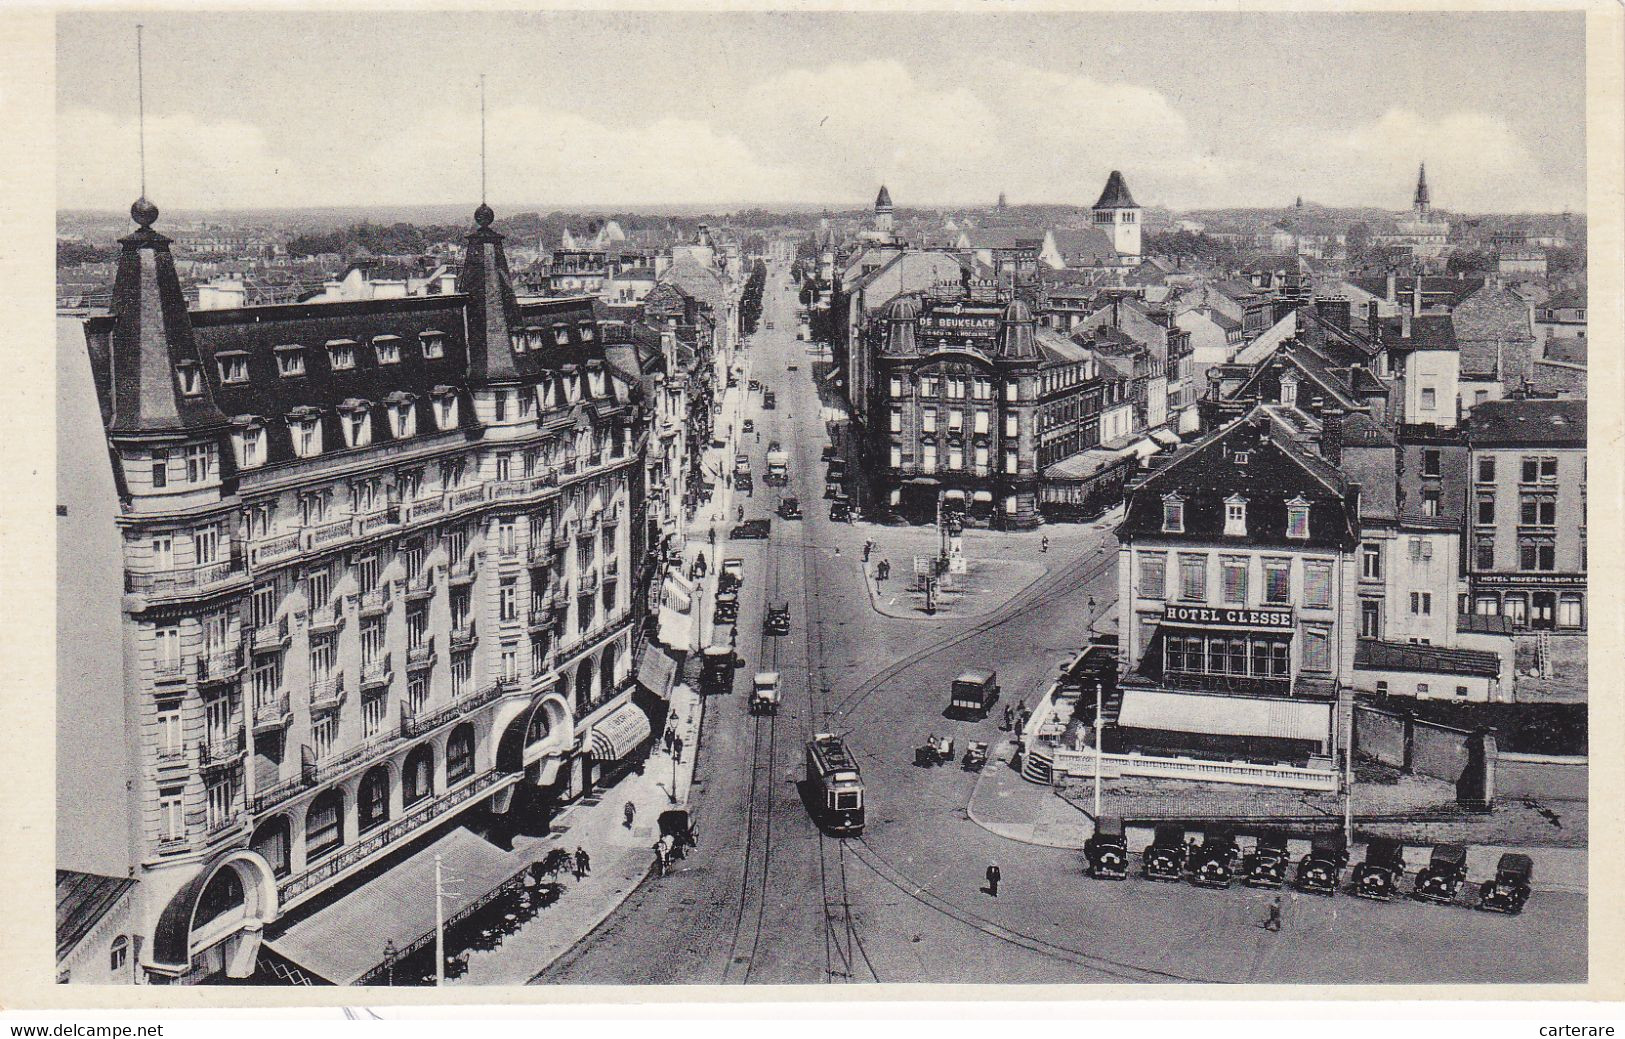 LUXEMBOURG,CARTE POSTALE ANCIENNE,HOTEL CLESSE - Luxemburg - Town